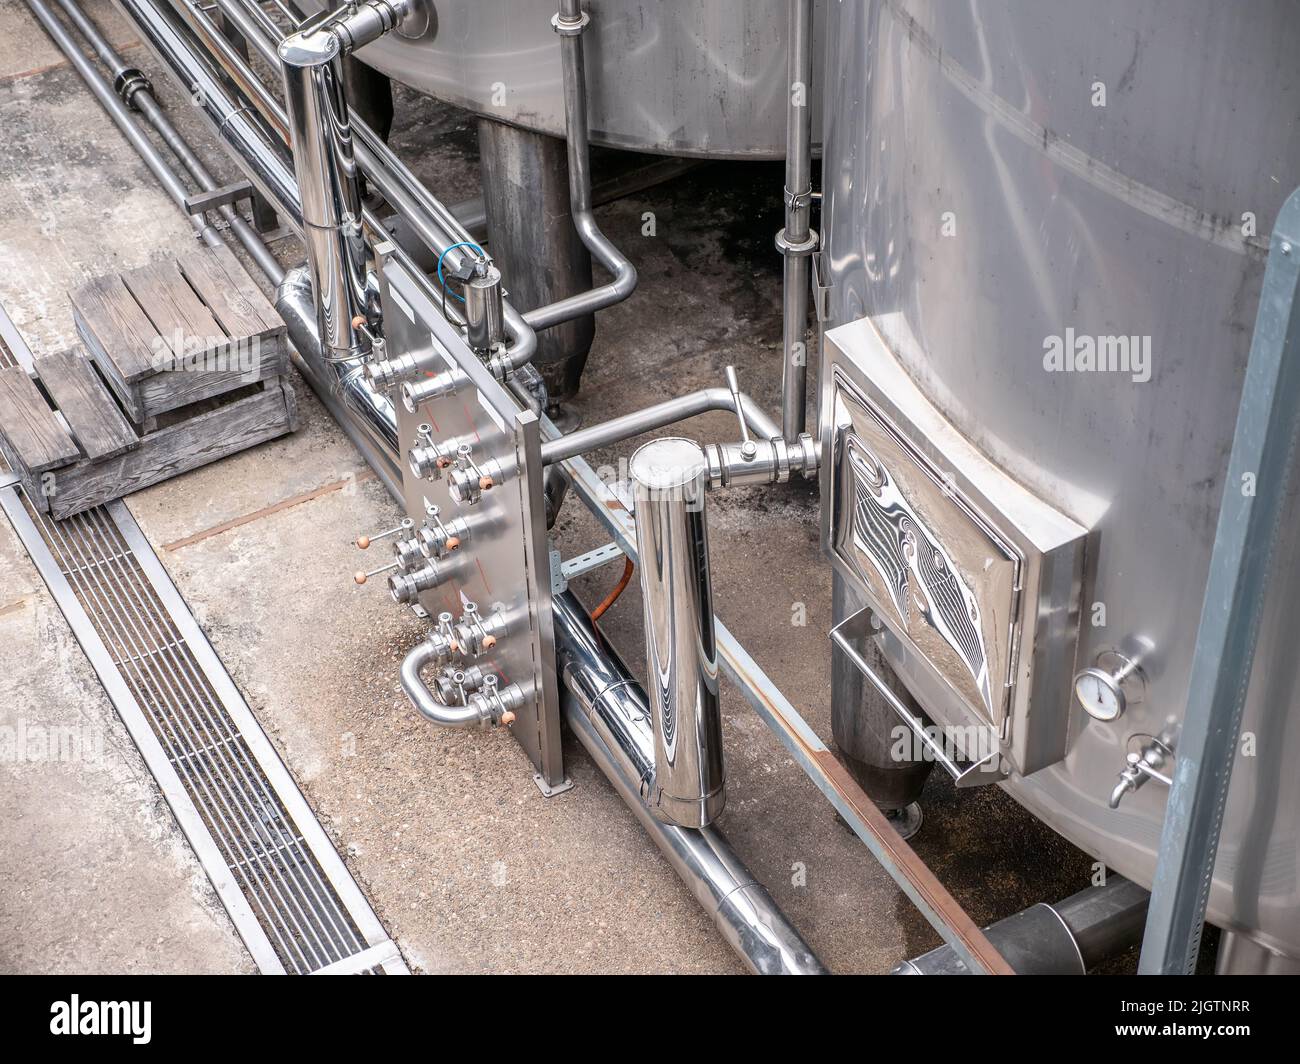 Steel tanks or reservoirs with pipes, food industry. Stock Photo